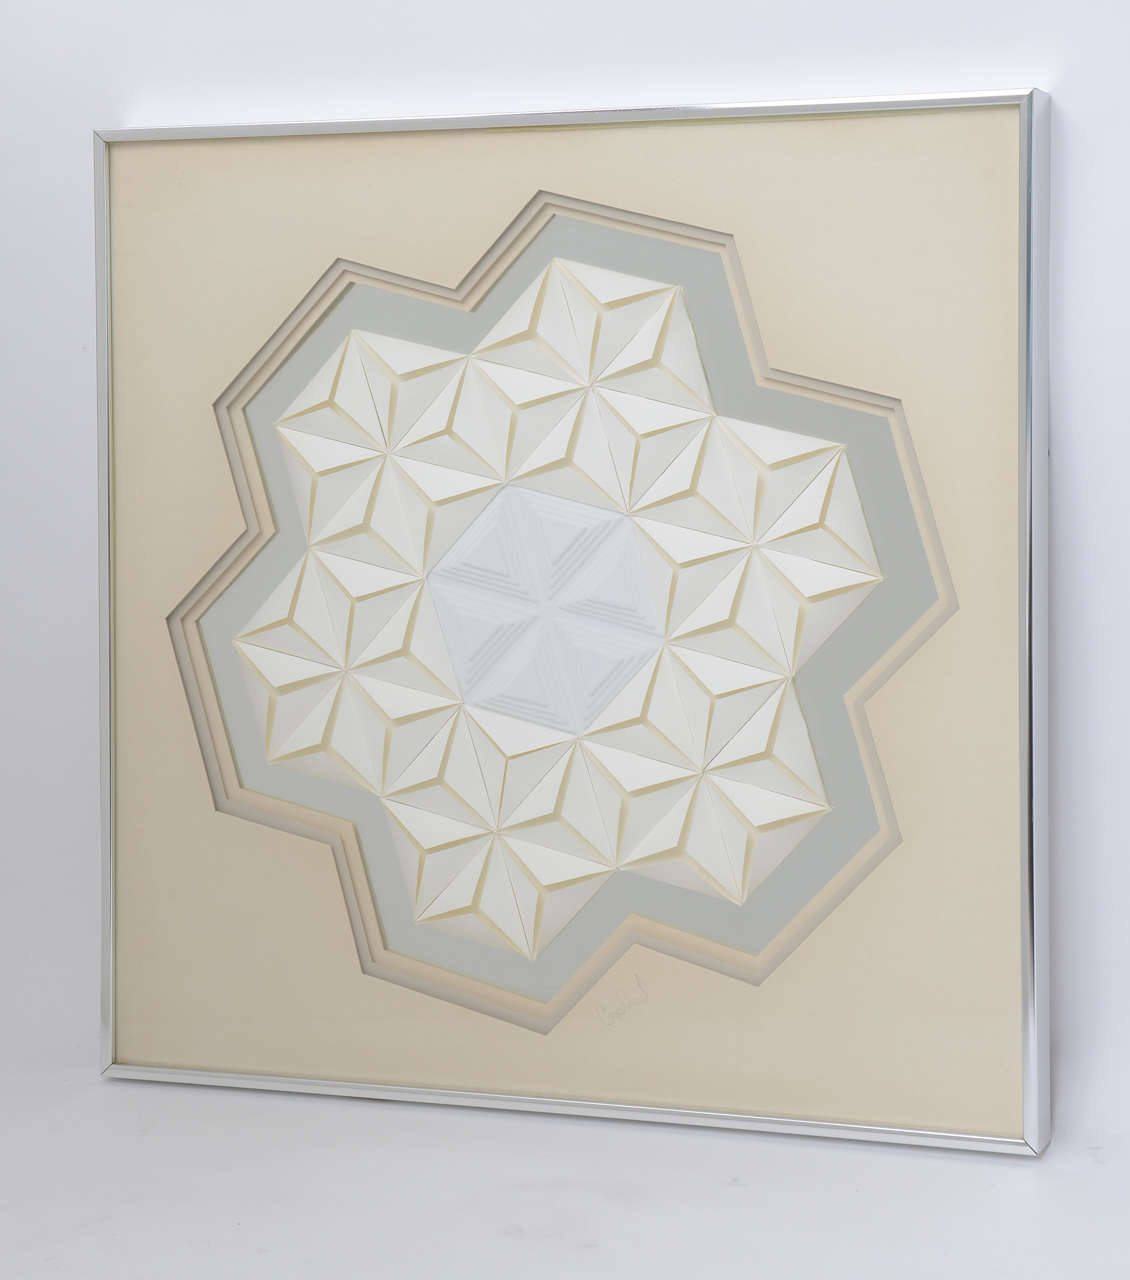 All our favorite colors combine in this mixed media wall sculpture by Greg Copeland. Off-white, folded paper patterns surround a dimensional white molded plastic center, with cream and grey matting on a reflective silver background. Tonal bliss!